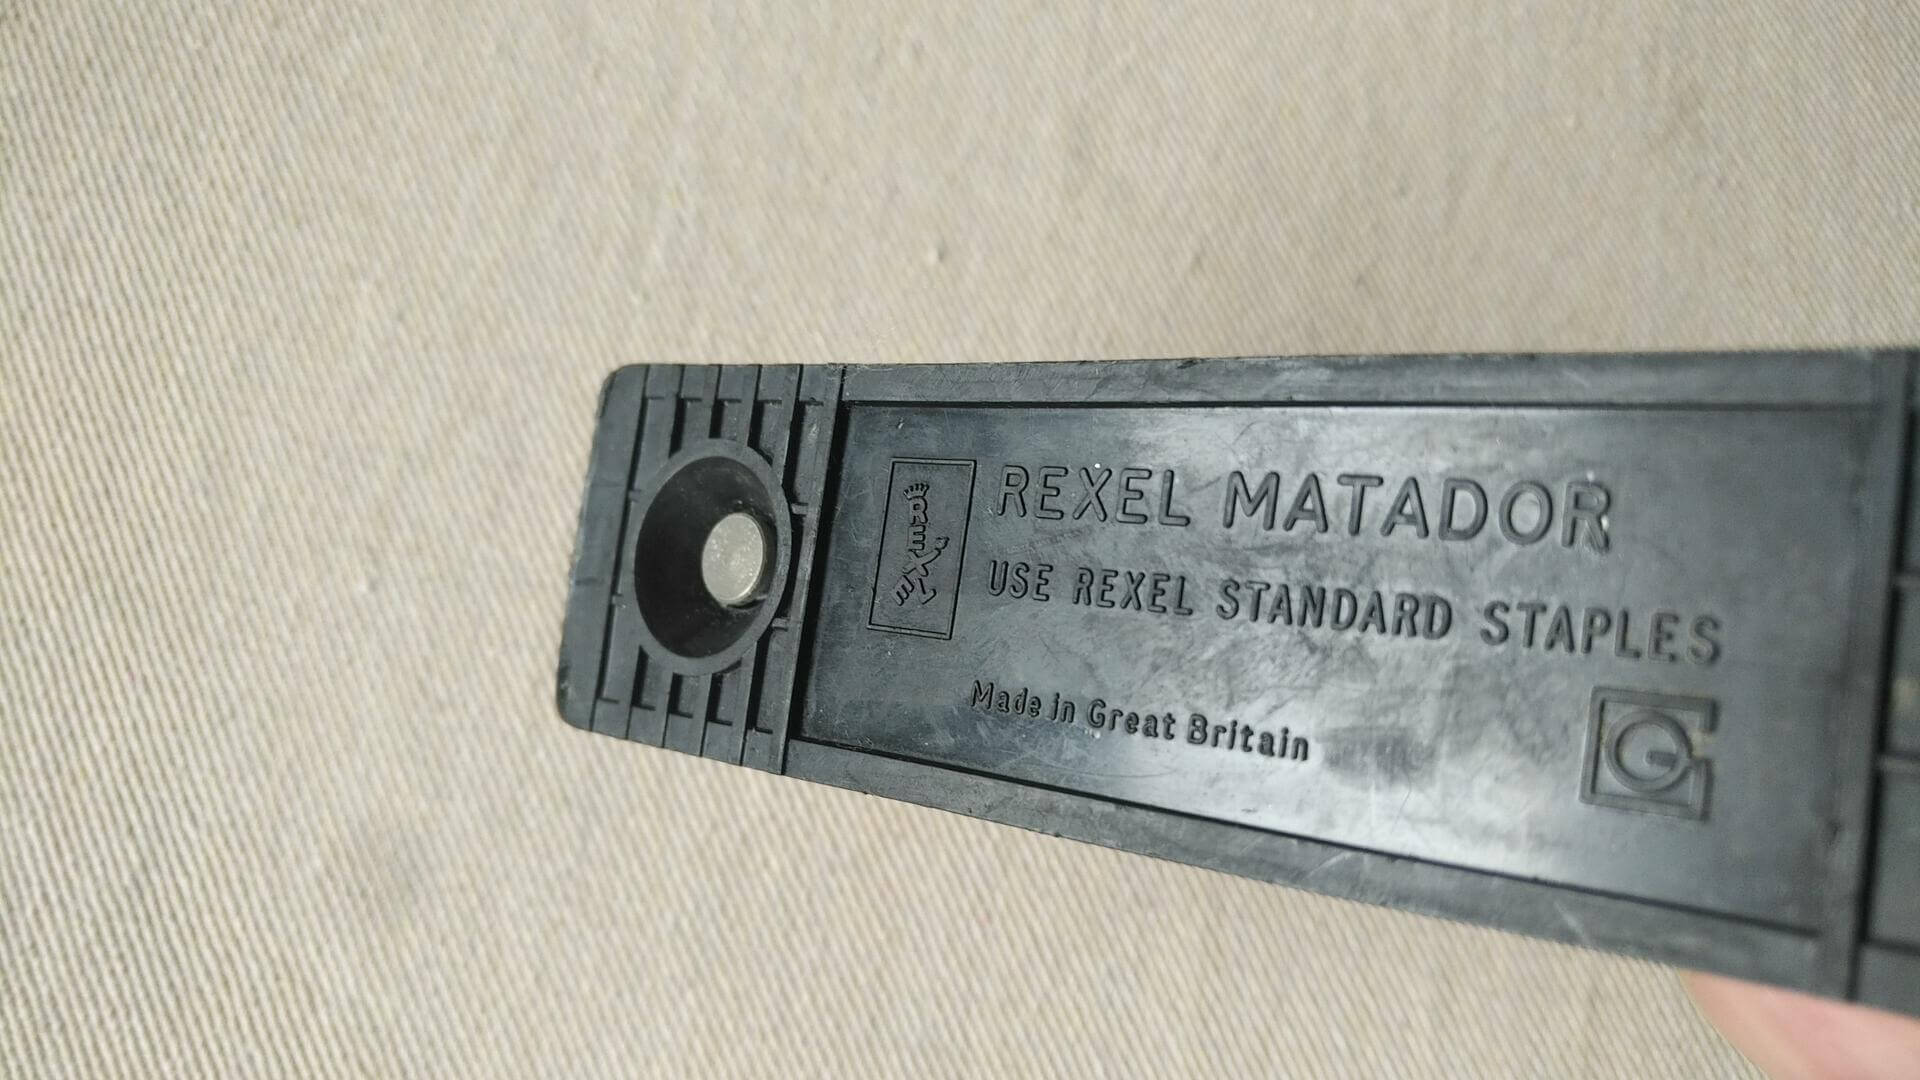 Nice vintage MCM Rexel Matador steel desk stapler in black colour. Mid century collectible made in Great Britain office equipment and stationery